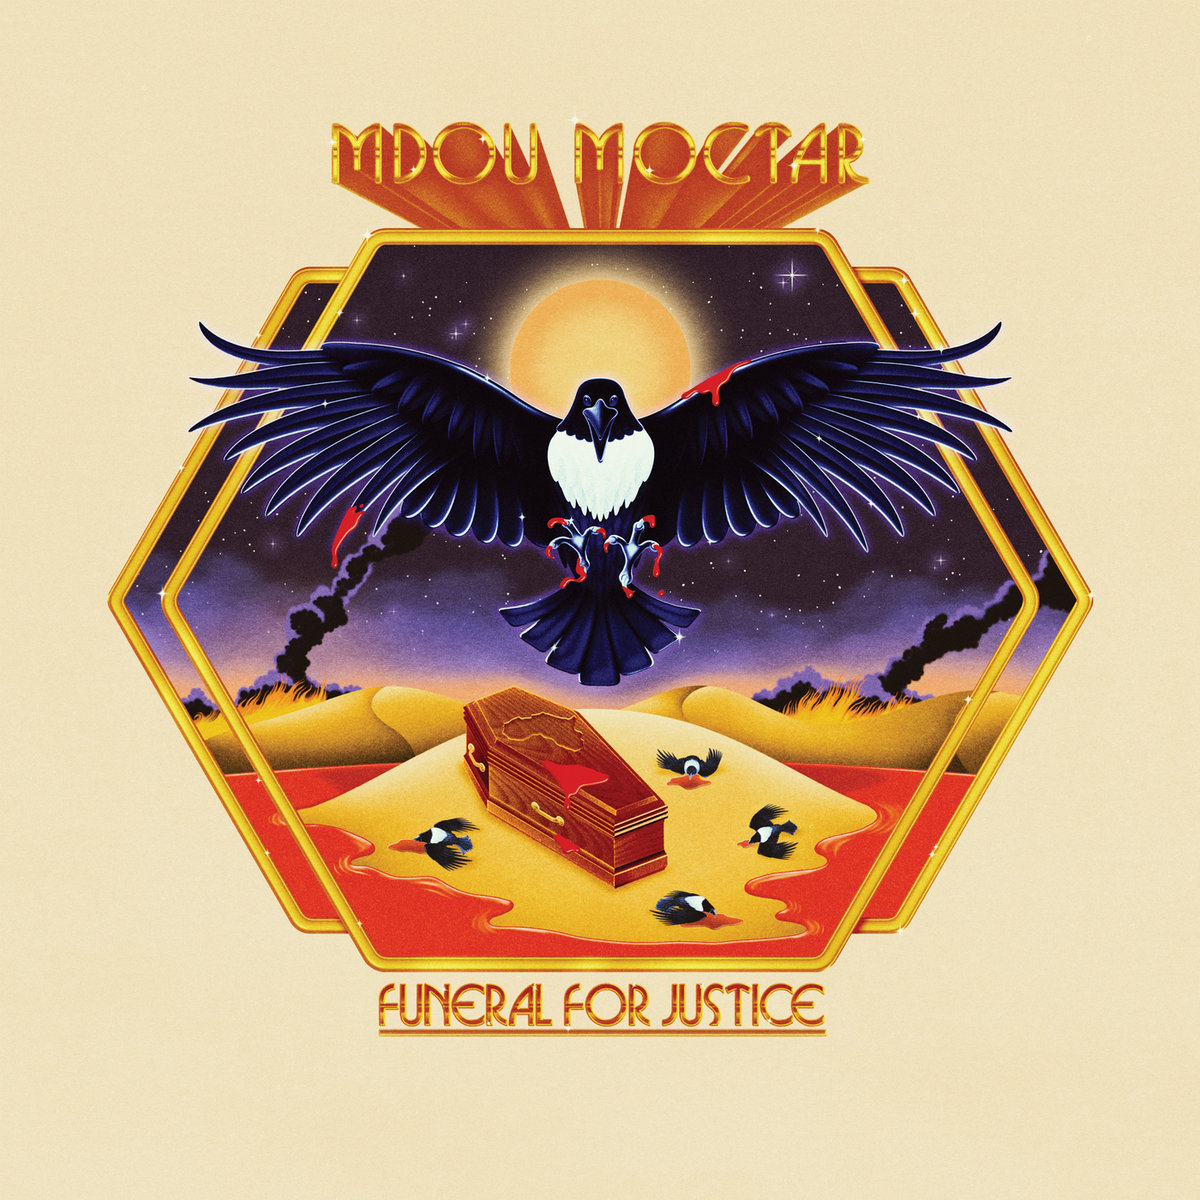 Mdou Moctar – Funeral For Justice